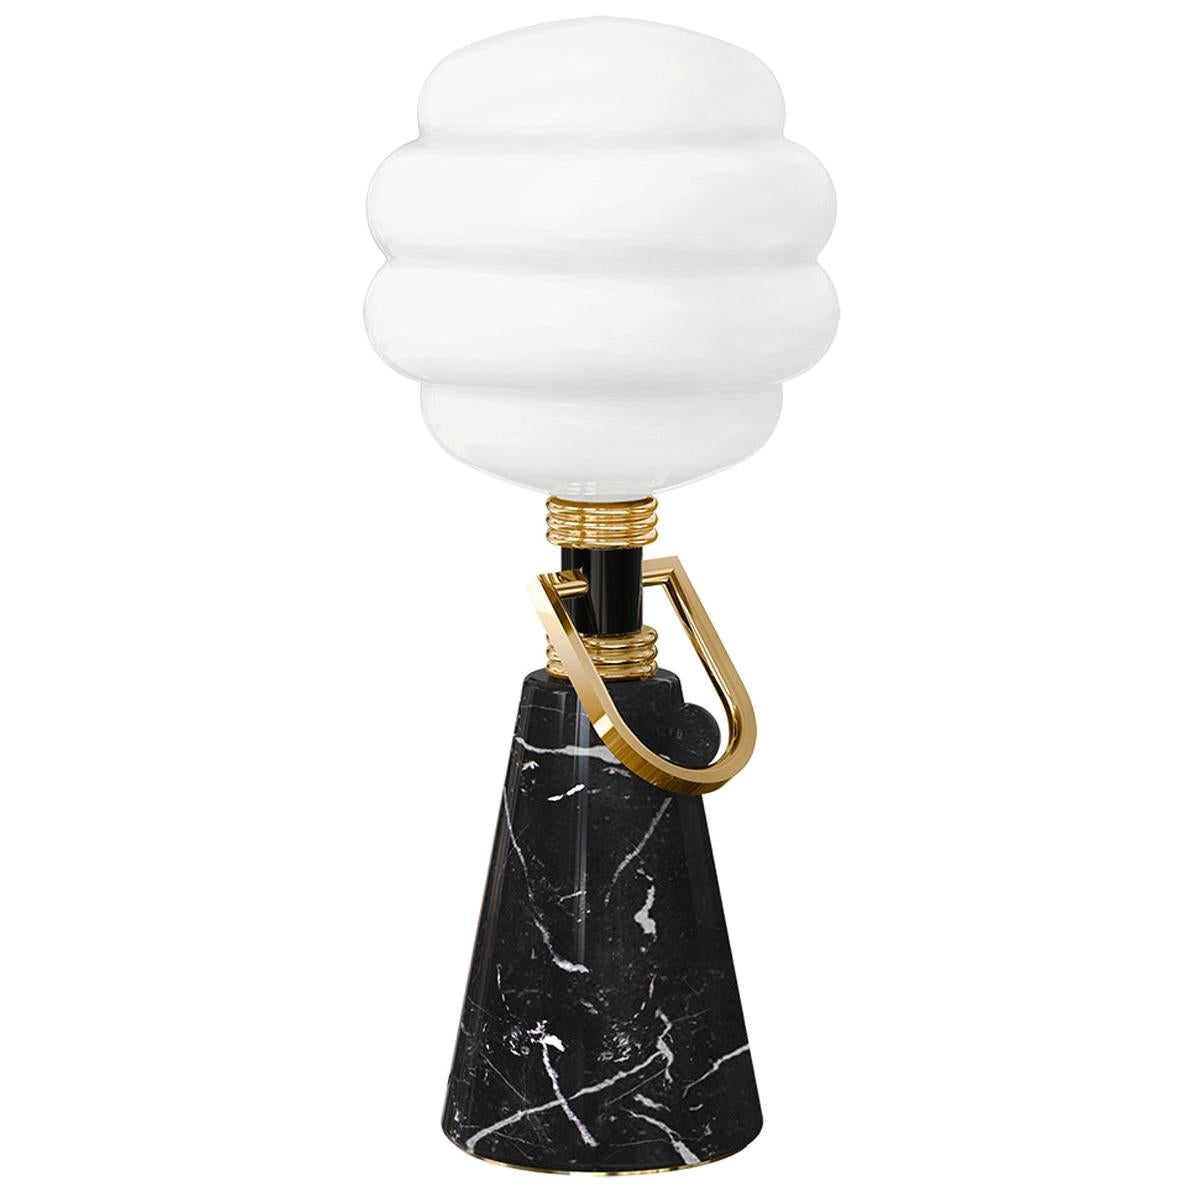 Art Deco Style Table Lamp in Negro Marquina Black Marble & Gold Polished Brass For Sale